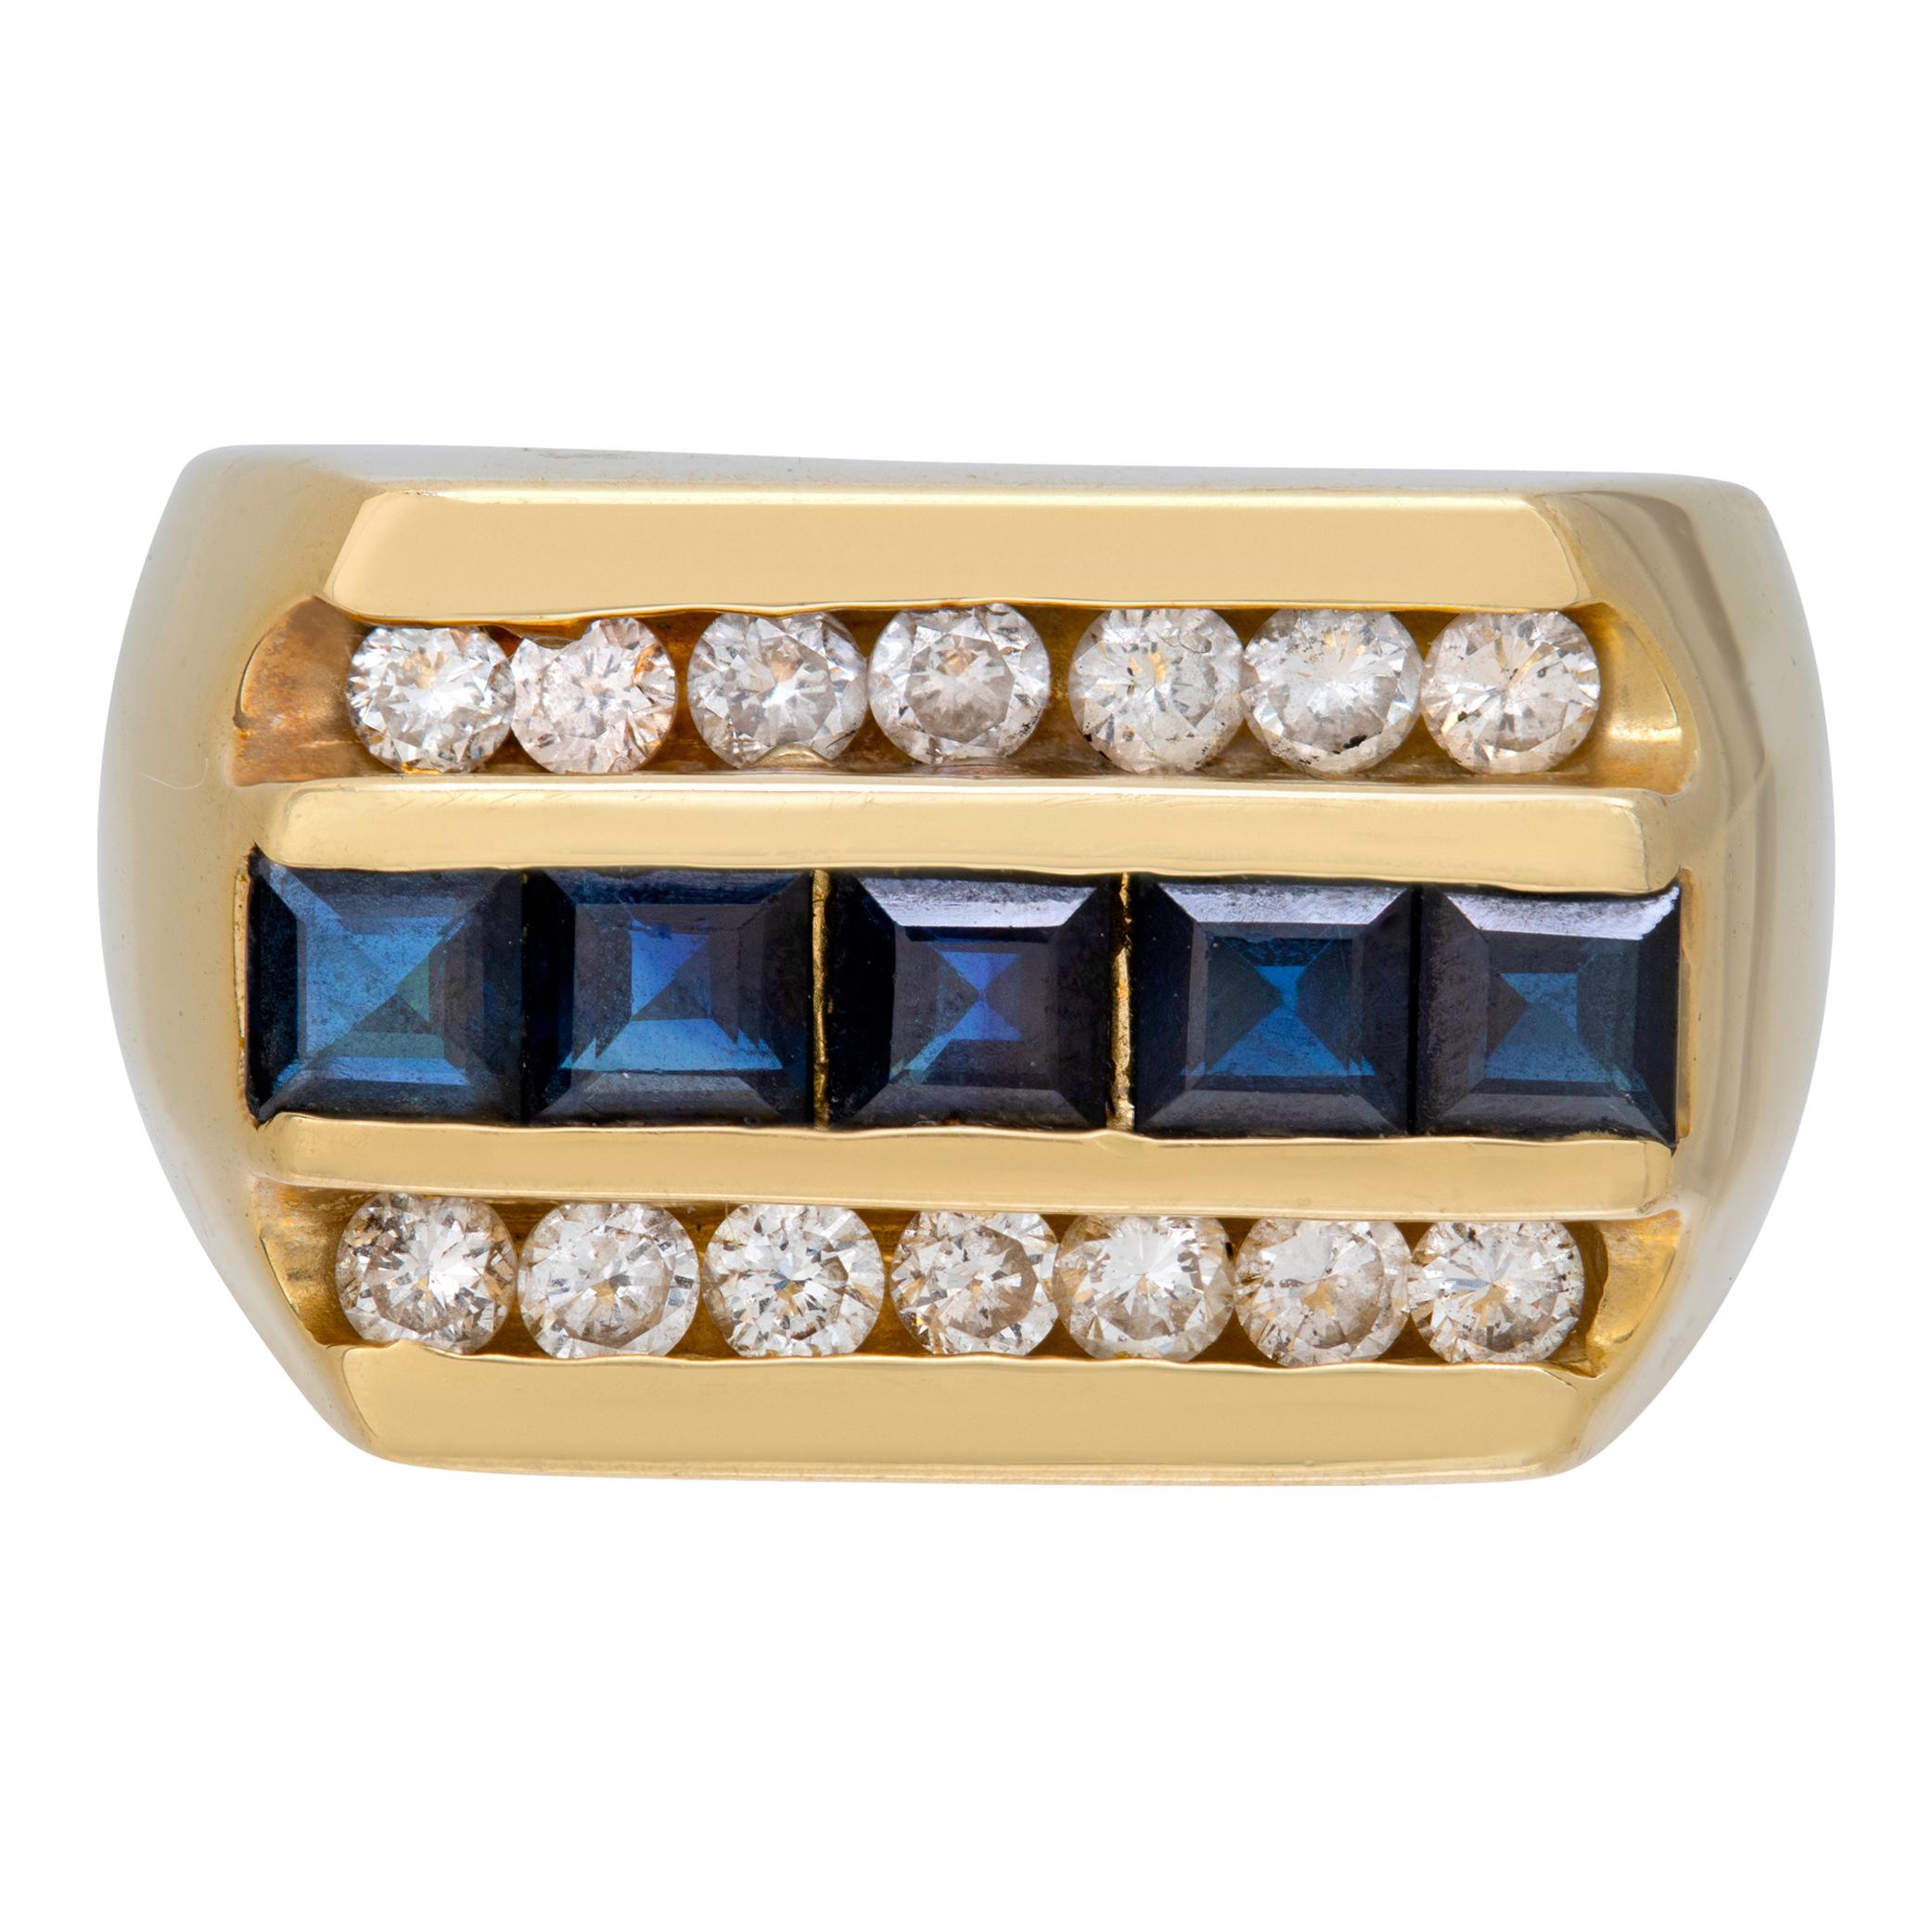 Striking & elegant ring with double row of diamonds around square cut deep blue sapphires in 14k yellow gold. Ring size 9.75, width 13mm.This Diamond/Sapphires ring is currently size 9.75 and some items can be sized up or down, please ask! It weighs